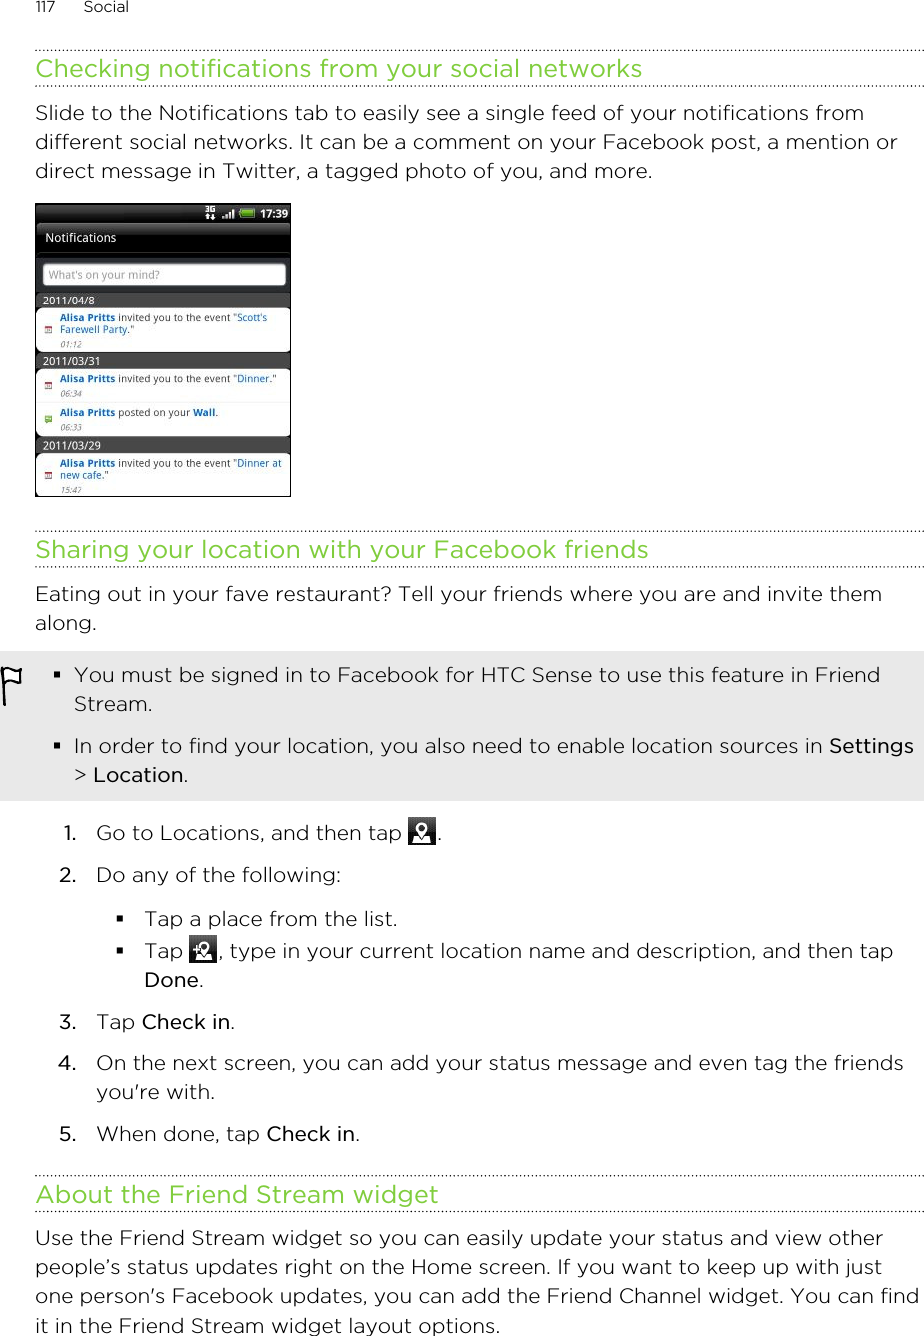 Checking notifications from your social networksSlide to the Notifications tab to easily see a single feed of your notifications fromdifferent social networks. It can be a comment on your Facebook post, a mention ordirect message in Twitter, a tagged photo of you, and more.Sharing your location with your Facebook friendsEating out in your fave restaurant? Tell your friends where you are and invite themalong.§You must be signed in to Facebook for HTC Sense to use this feature in FriendStream.§In order to find your location, you also need to enable location sources in Settings&gt; Location.1. Go to Locations, and then tap  .2. Do any of the following:§Tap a place from the list.§Tap  , type in your current location name and description, and then tapDone.3. Tap Check in.4. On the next screen, you can add your status message and even tag the friendsyou&apos;re with.5. When done, tap Check in.About the Friend Stream widgetUse the Friend Stream widget so you can easily update your status and view otherpeople’s status updates right on the Home screen. If you want to keep up with justone person&apos;s Facebook updates, you can add the Friend Channel widget. You can findit in the Friend Stream widget layout options.117 Social